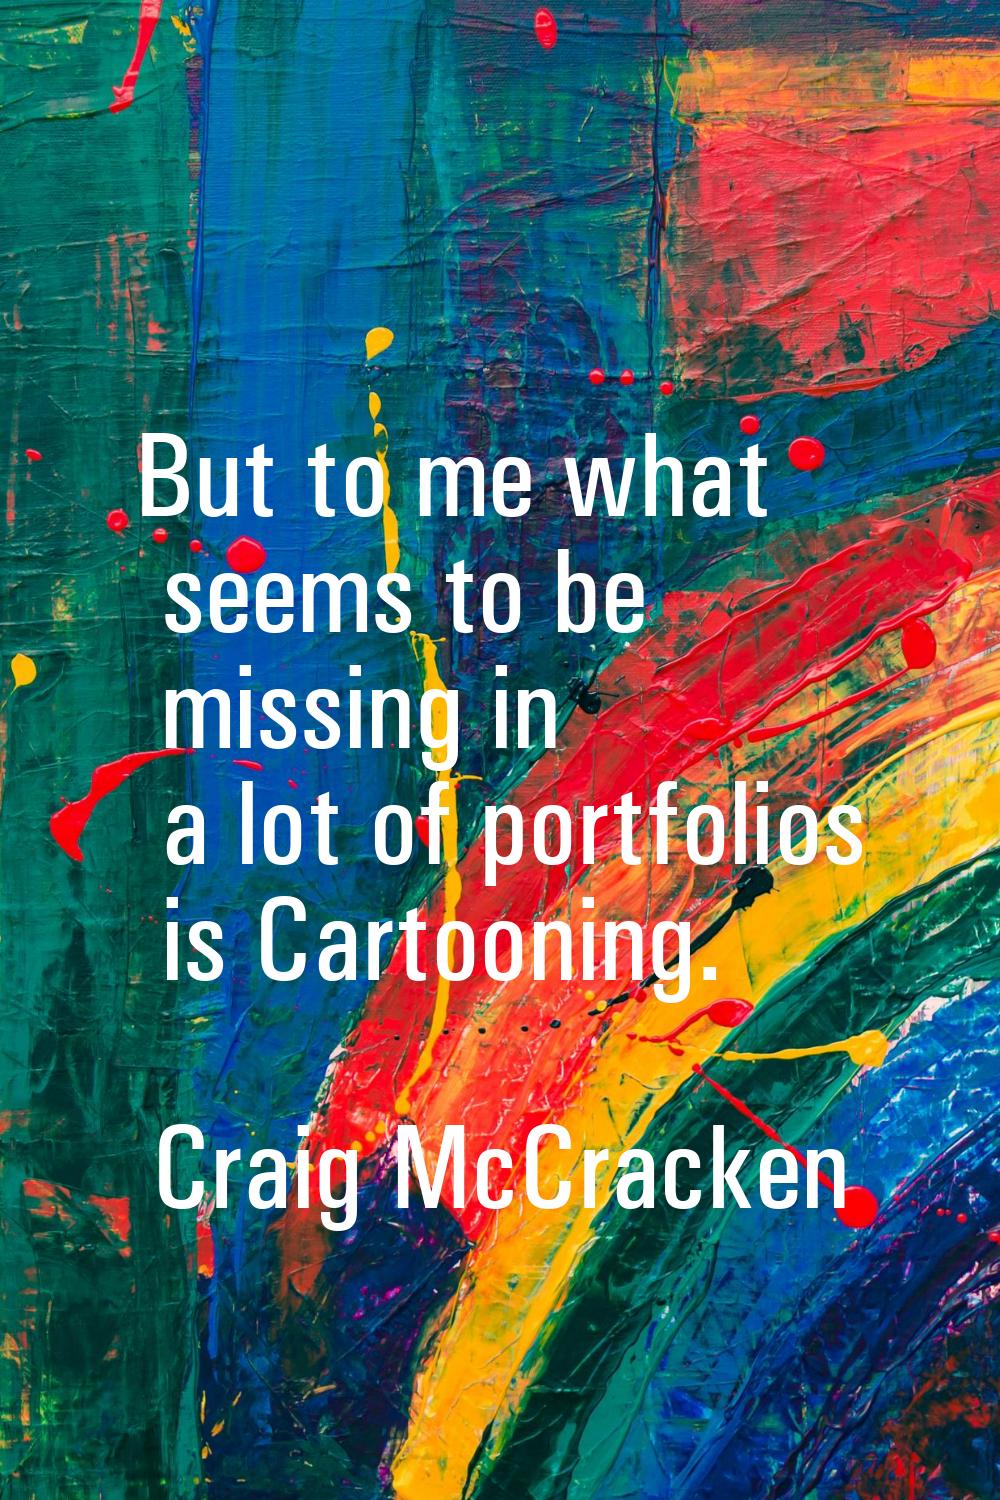 But to me what seems to be missing in a lot of portfolios is Cartooning.